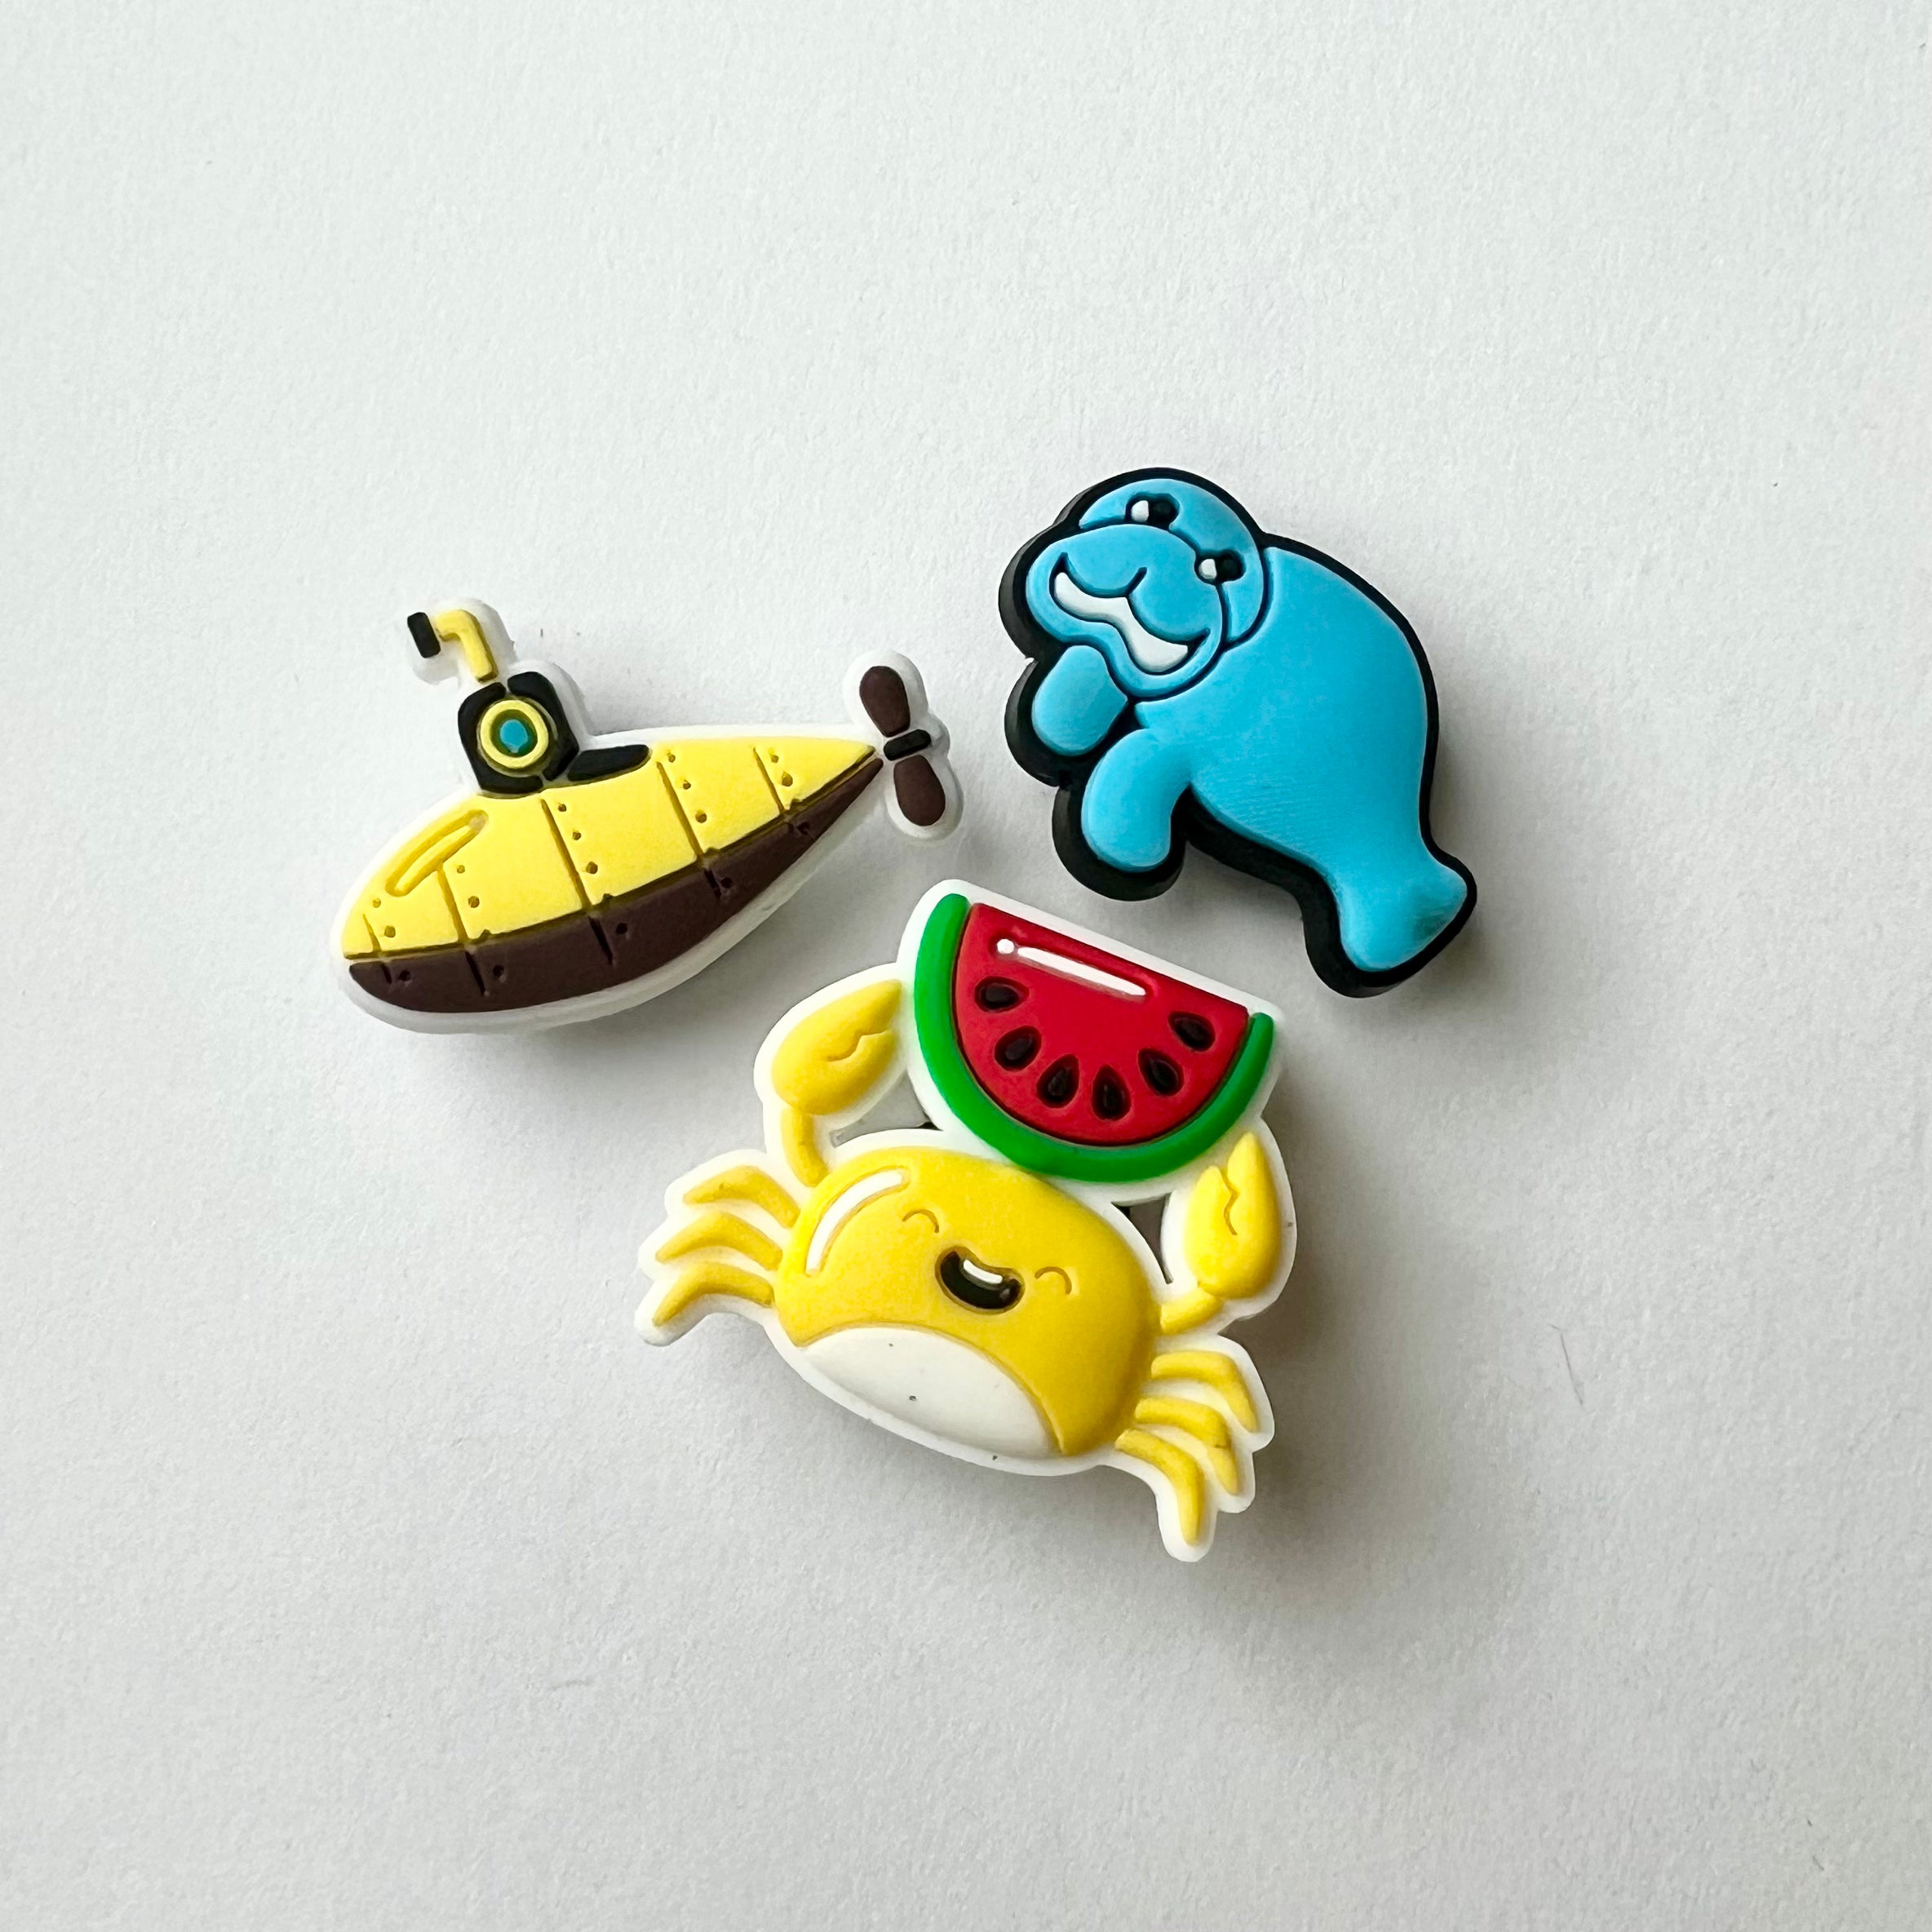 The Submarine Charms Pack